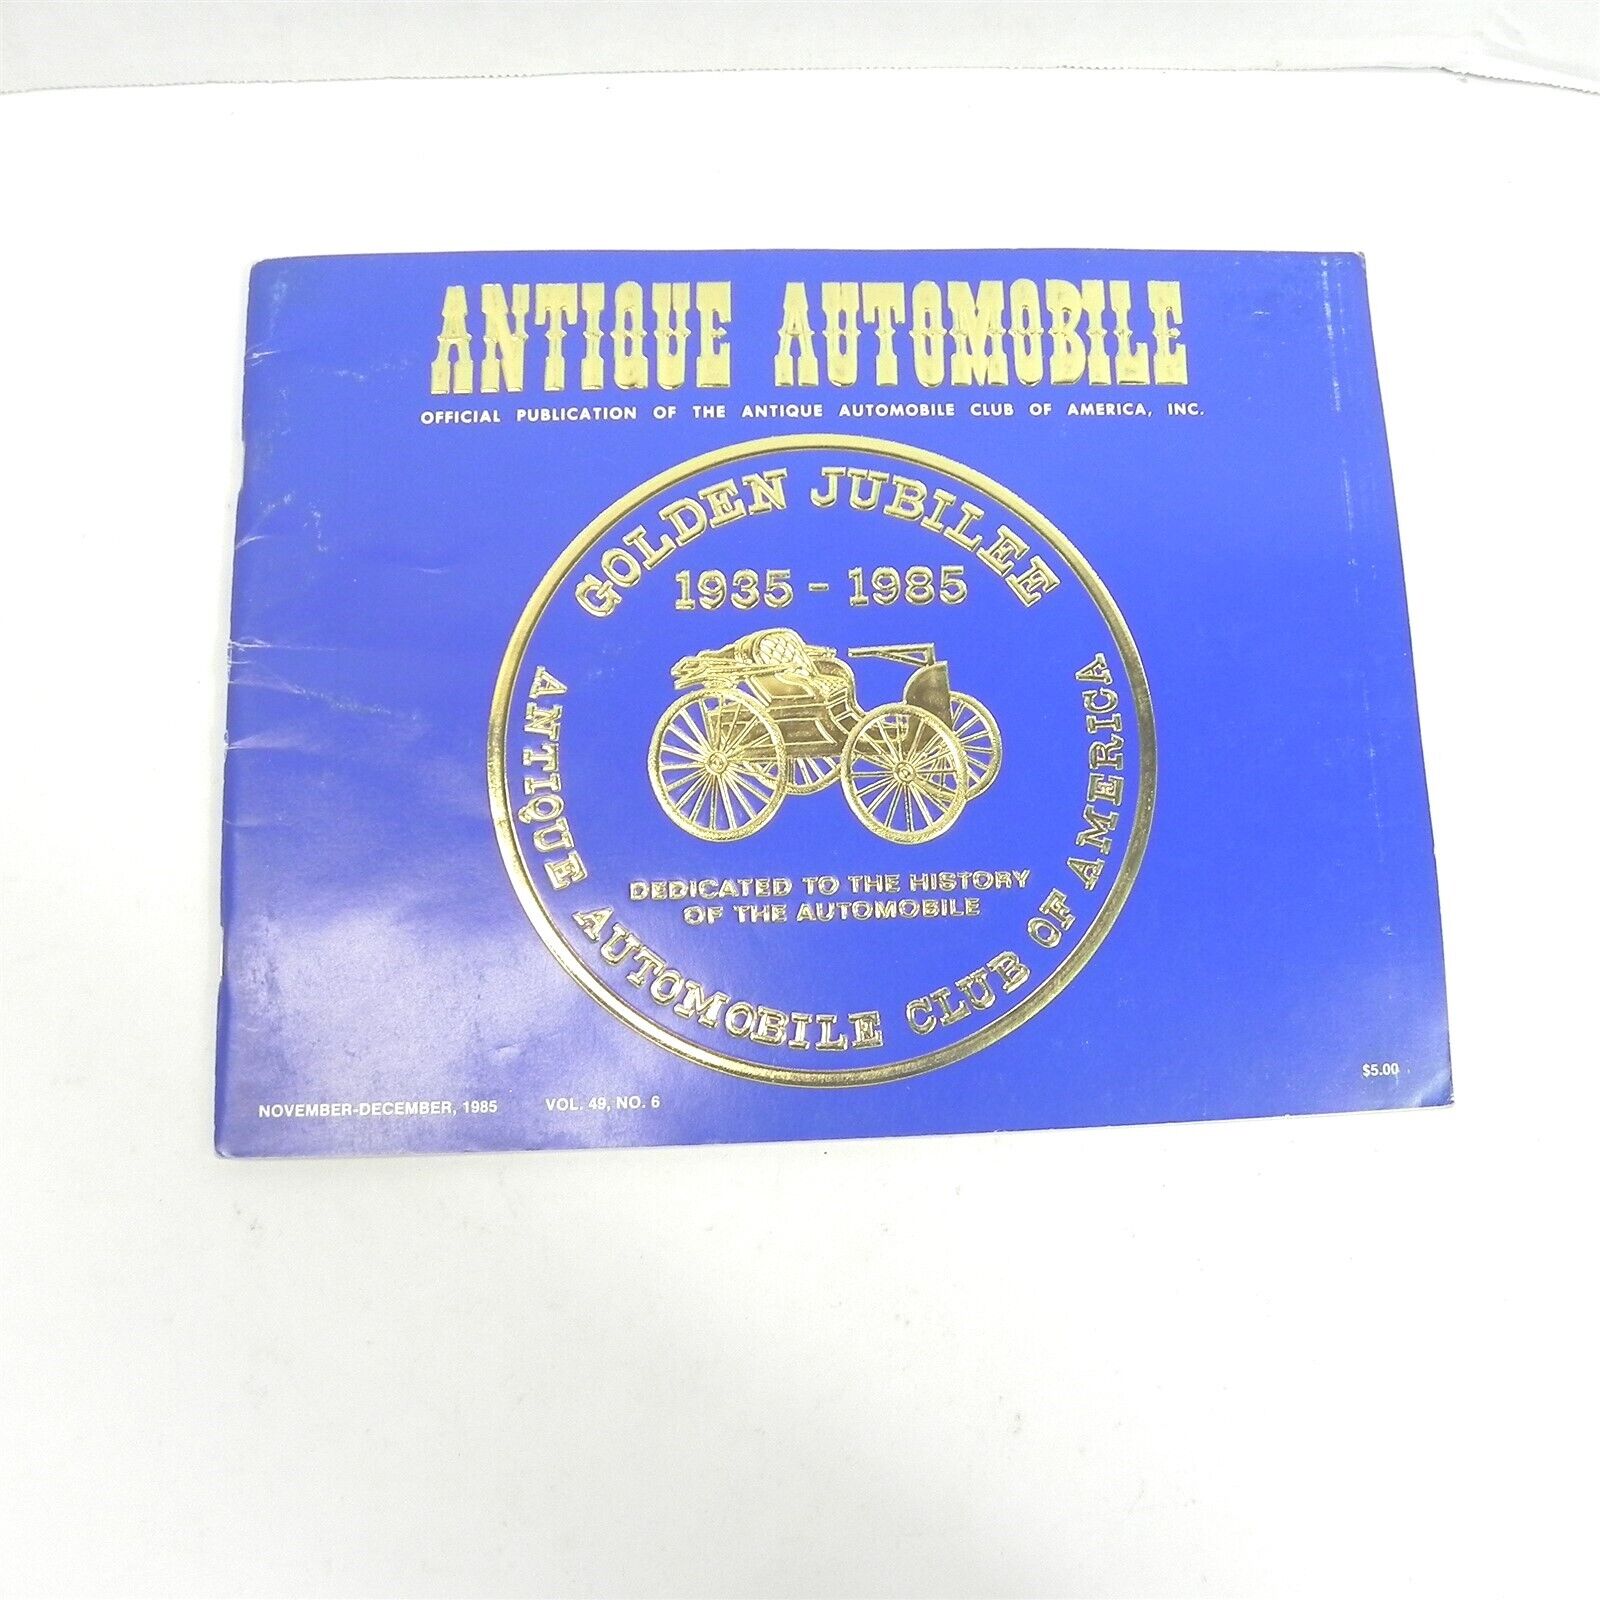 VINTAGE 1985 ANTIQUE AUTOMOBILE CLUB OF AMERICA GOLDEN JUBILEE SINGLE ISSUE